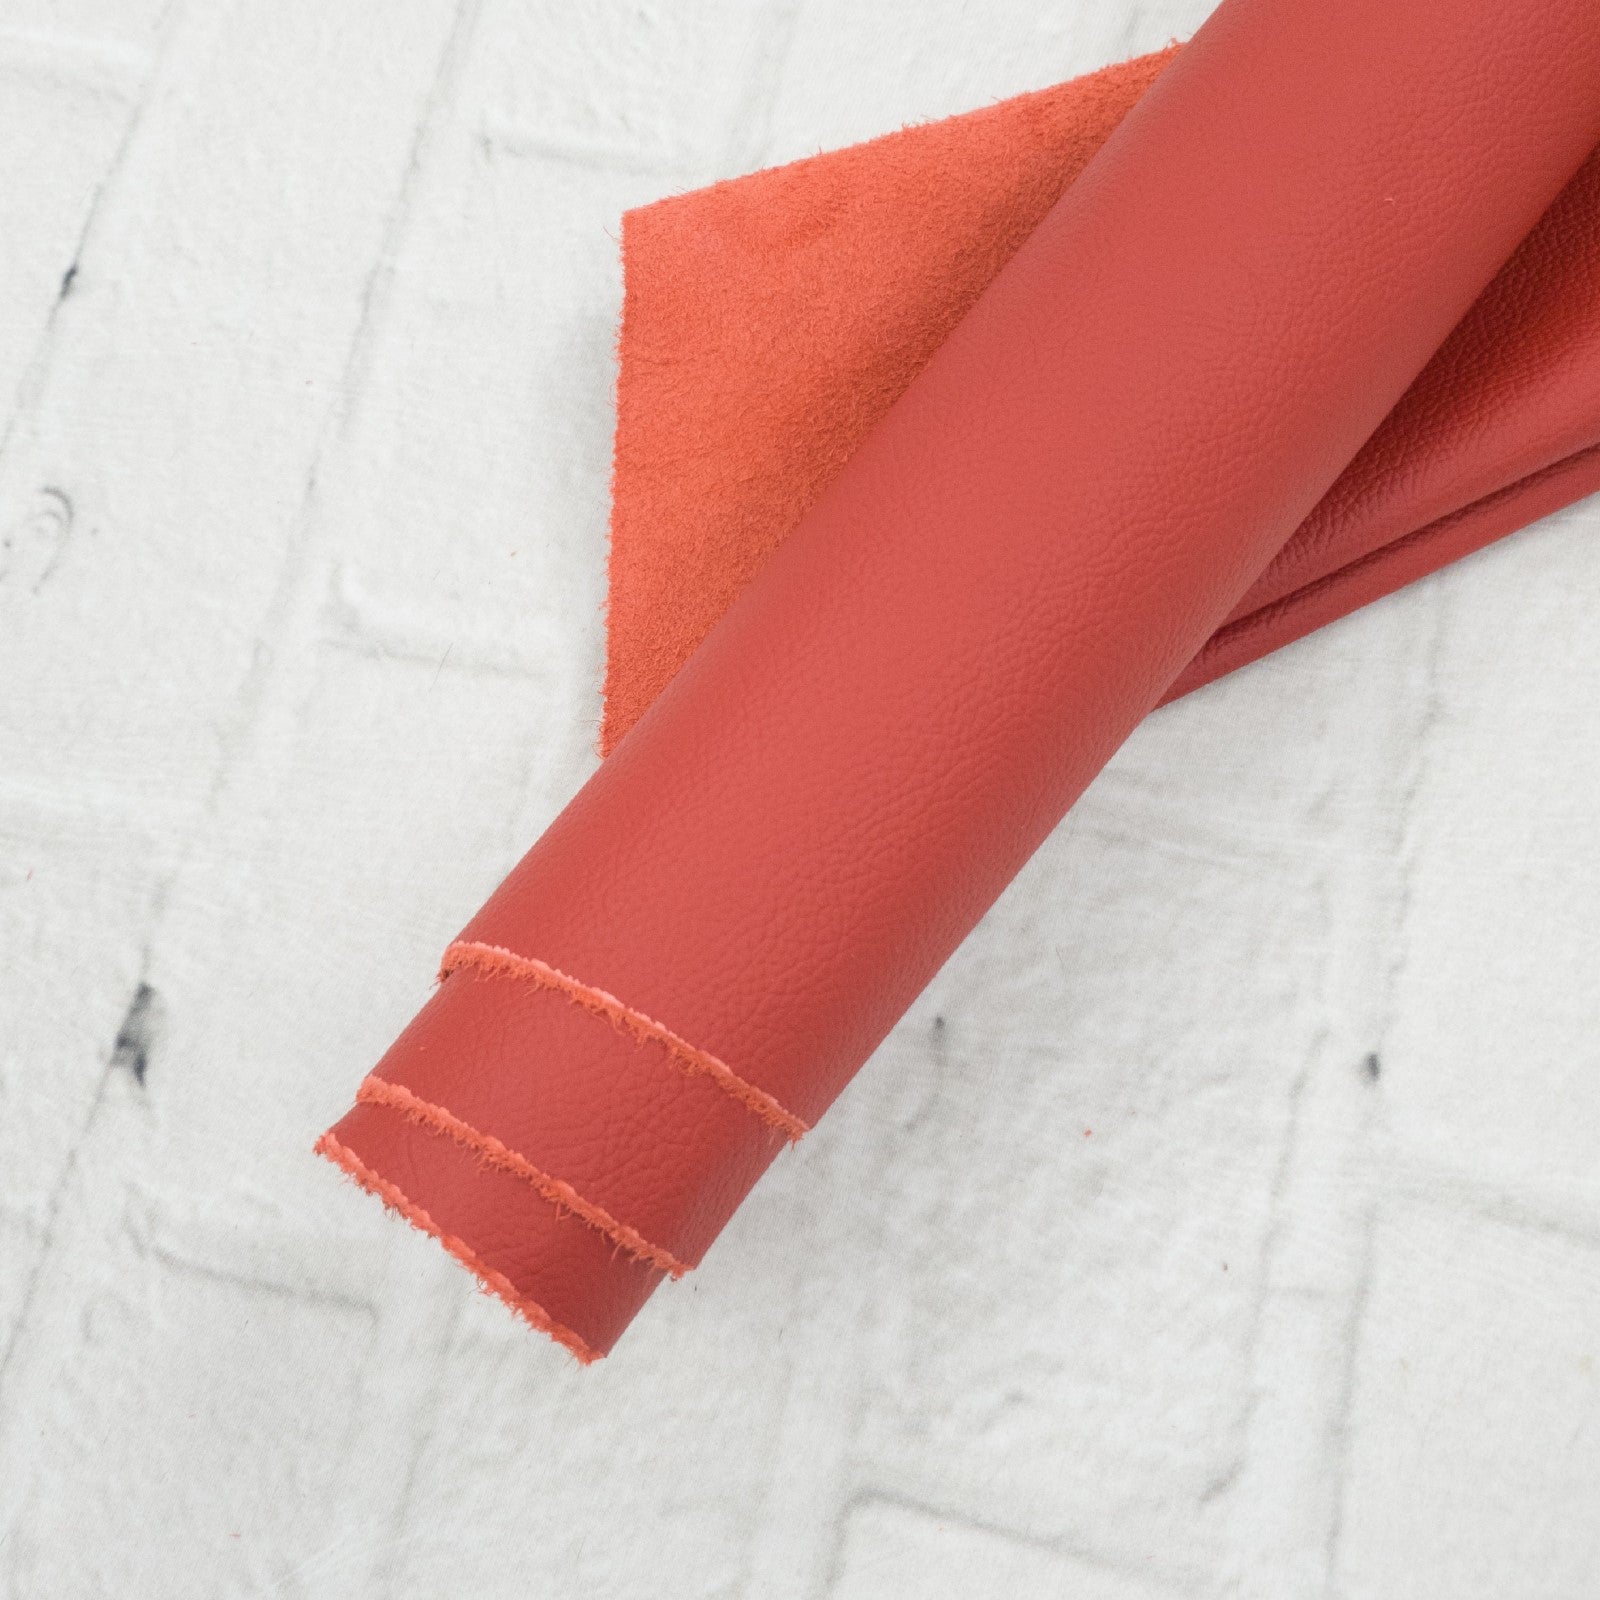 Energized Red, 5.5-23 Sq Ft, 2.5-3 oz Cow Hides, Vital Upholstery Collection,  | The Leather Guy